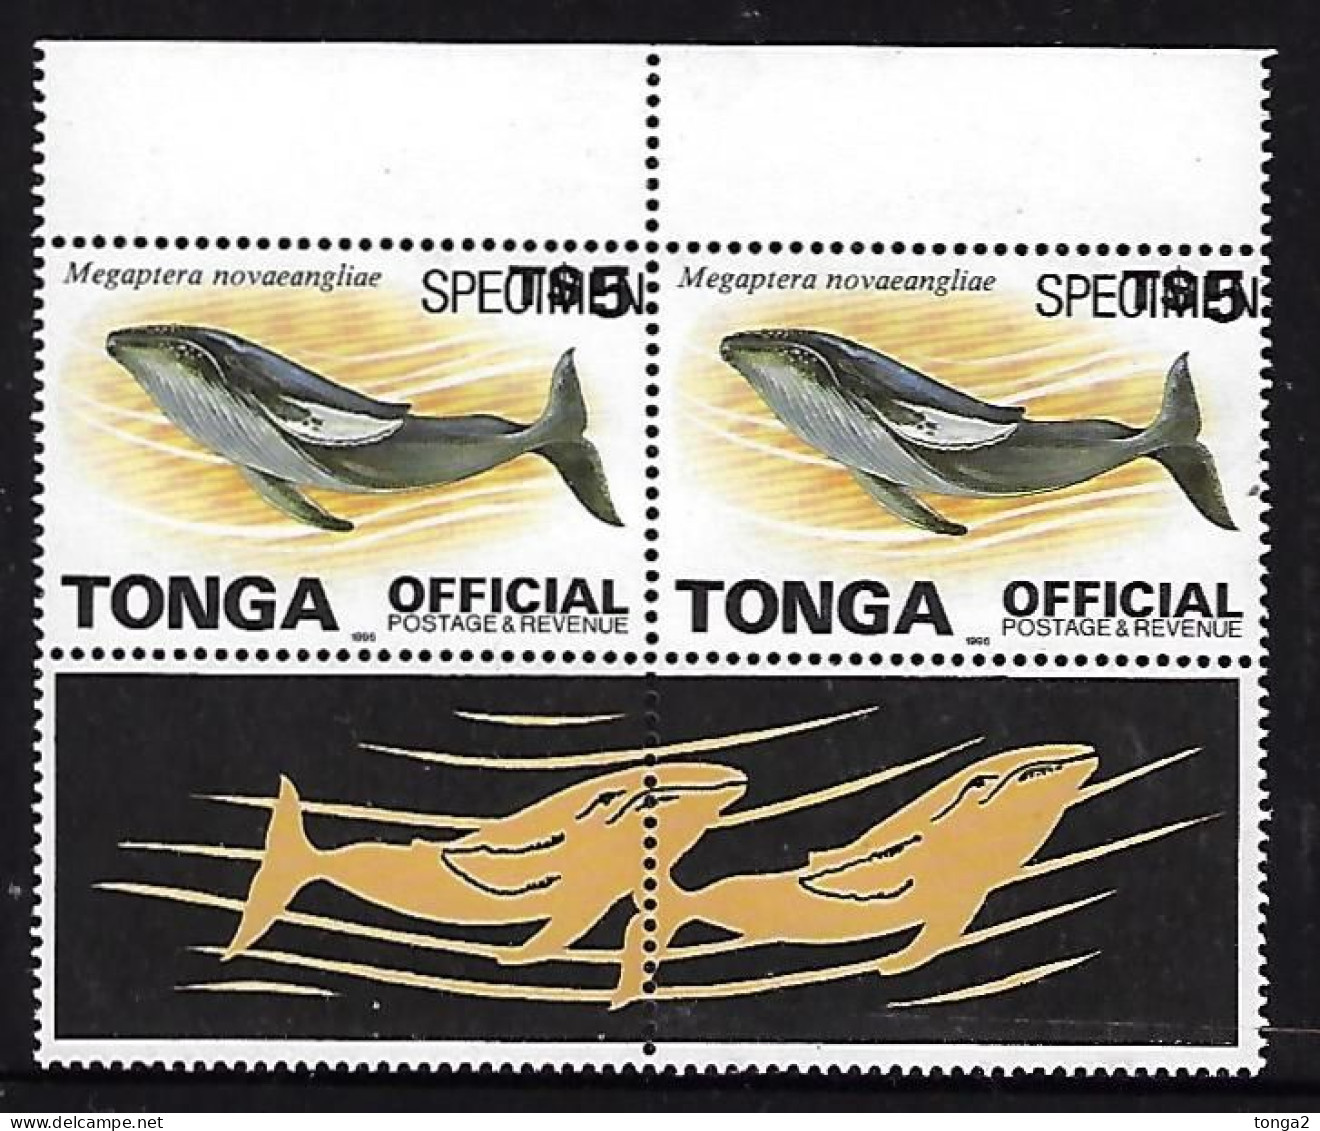 Tonga 1996 - $5.00 Whale Official Pair Ovptd Pecimen - Whales